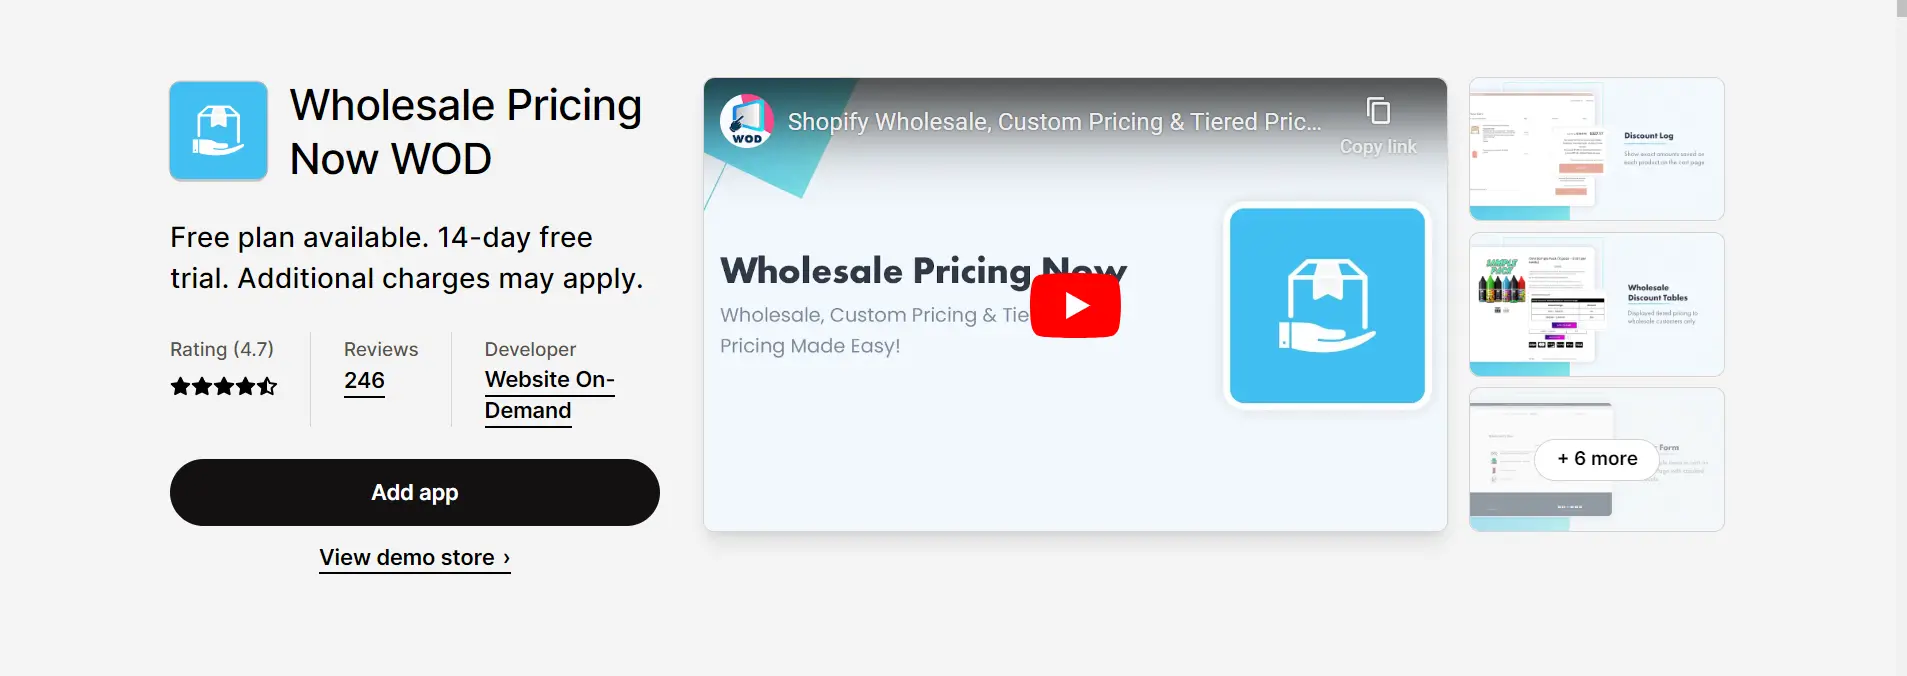 Wholesale Pricing Now